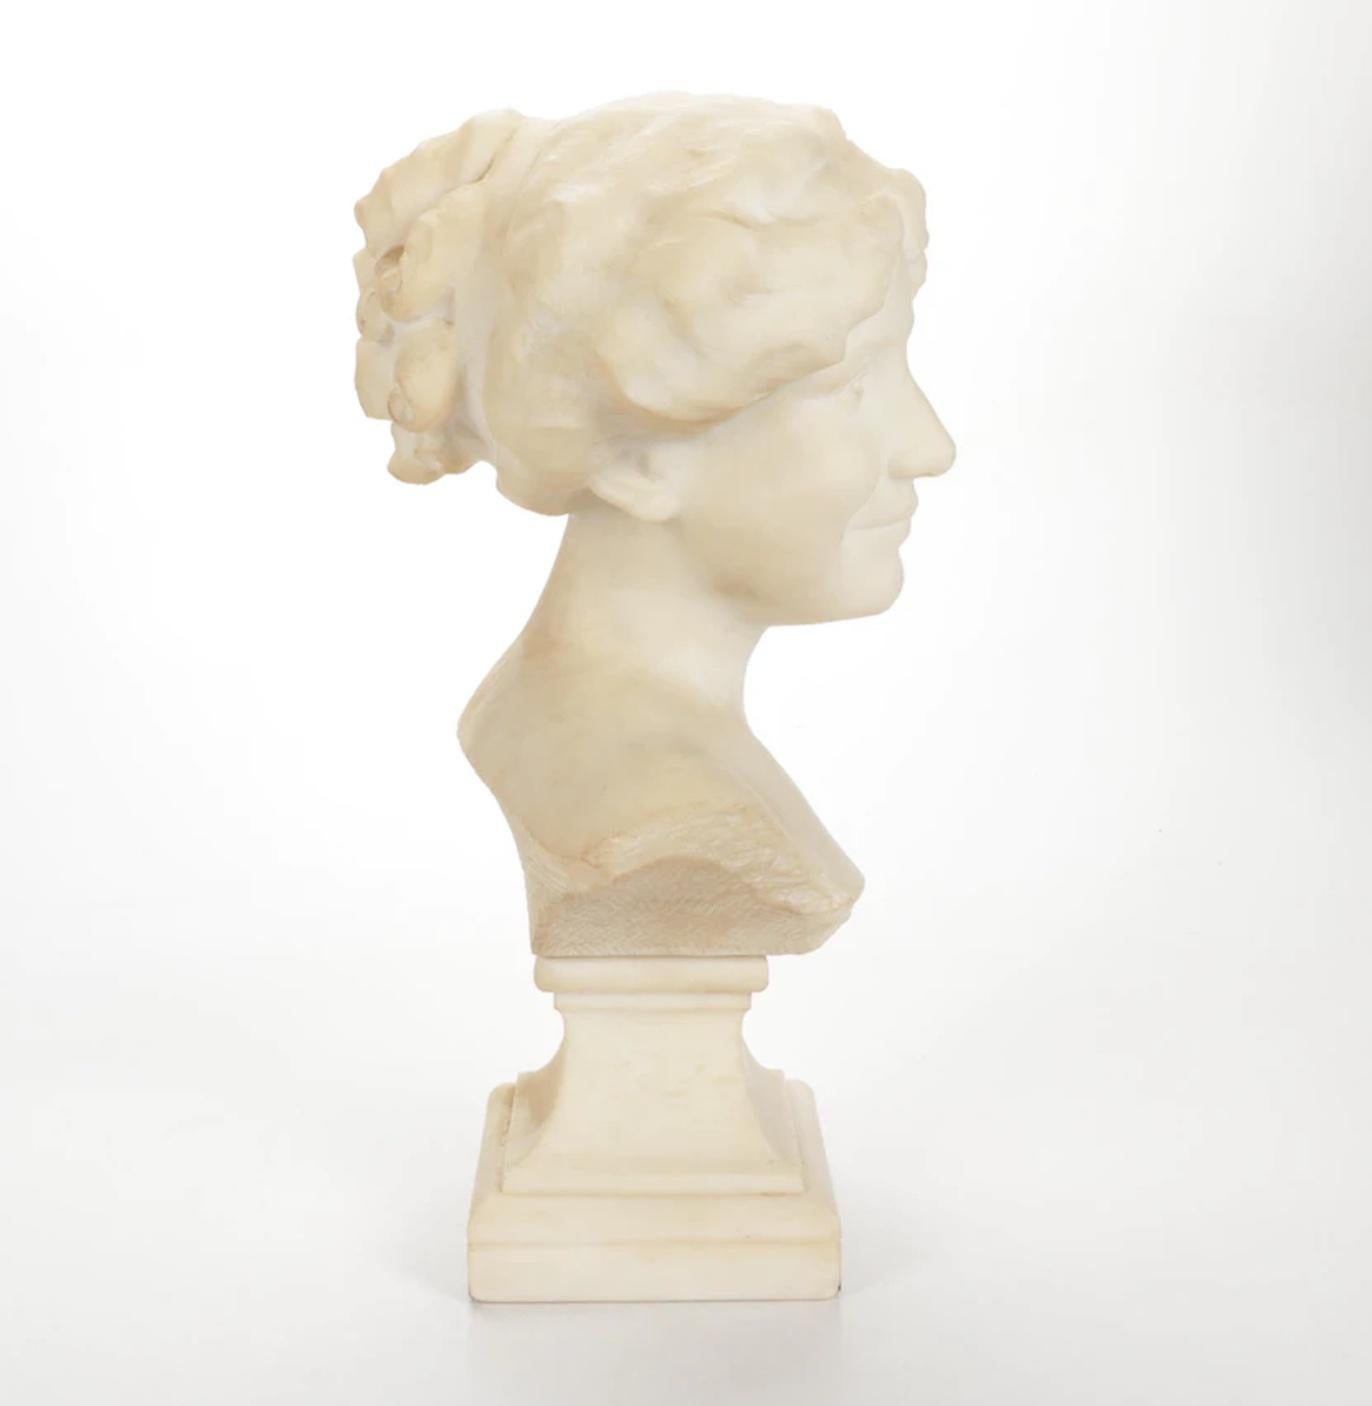 A stunning carved Carrara marble bust of a young woman 

By Paul Philippe

France, Circa 1920s

Measures: 11.75